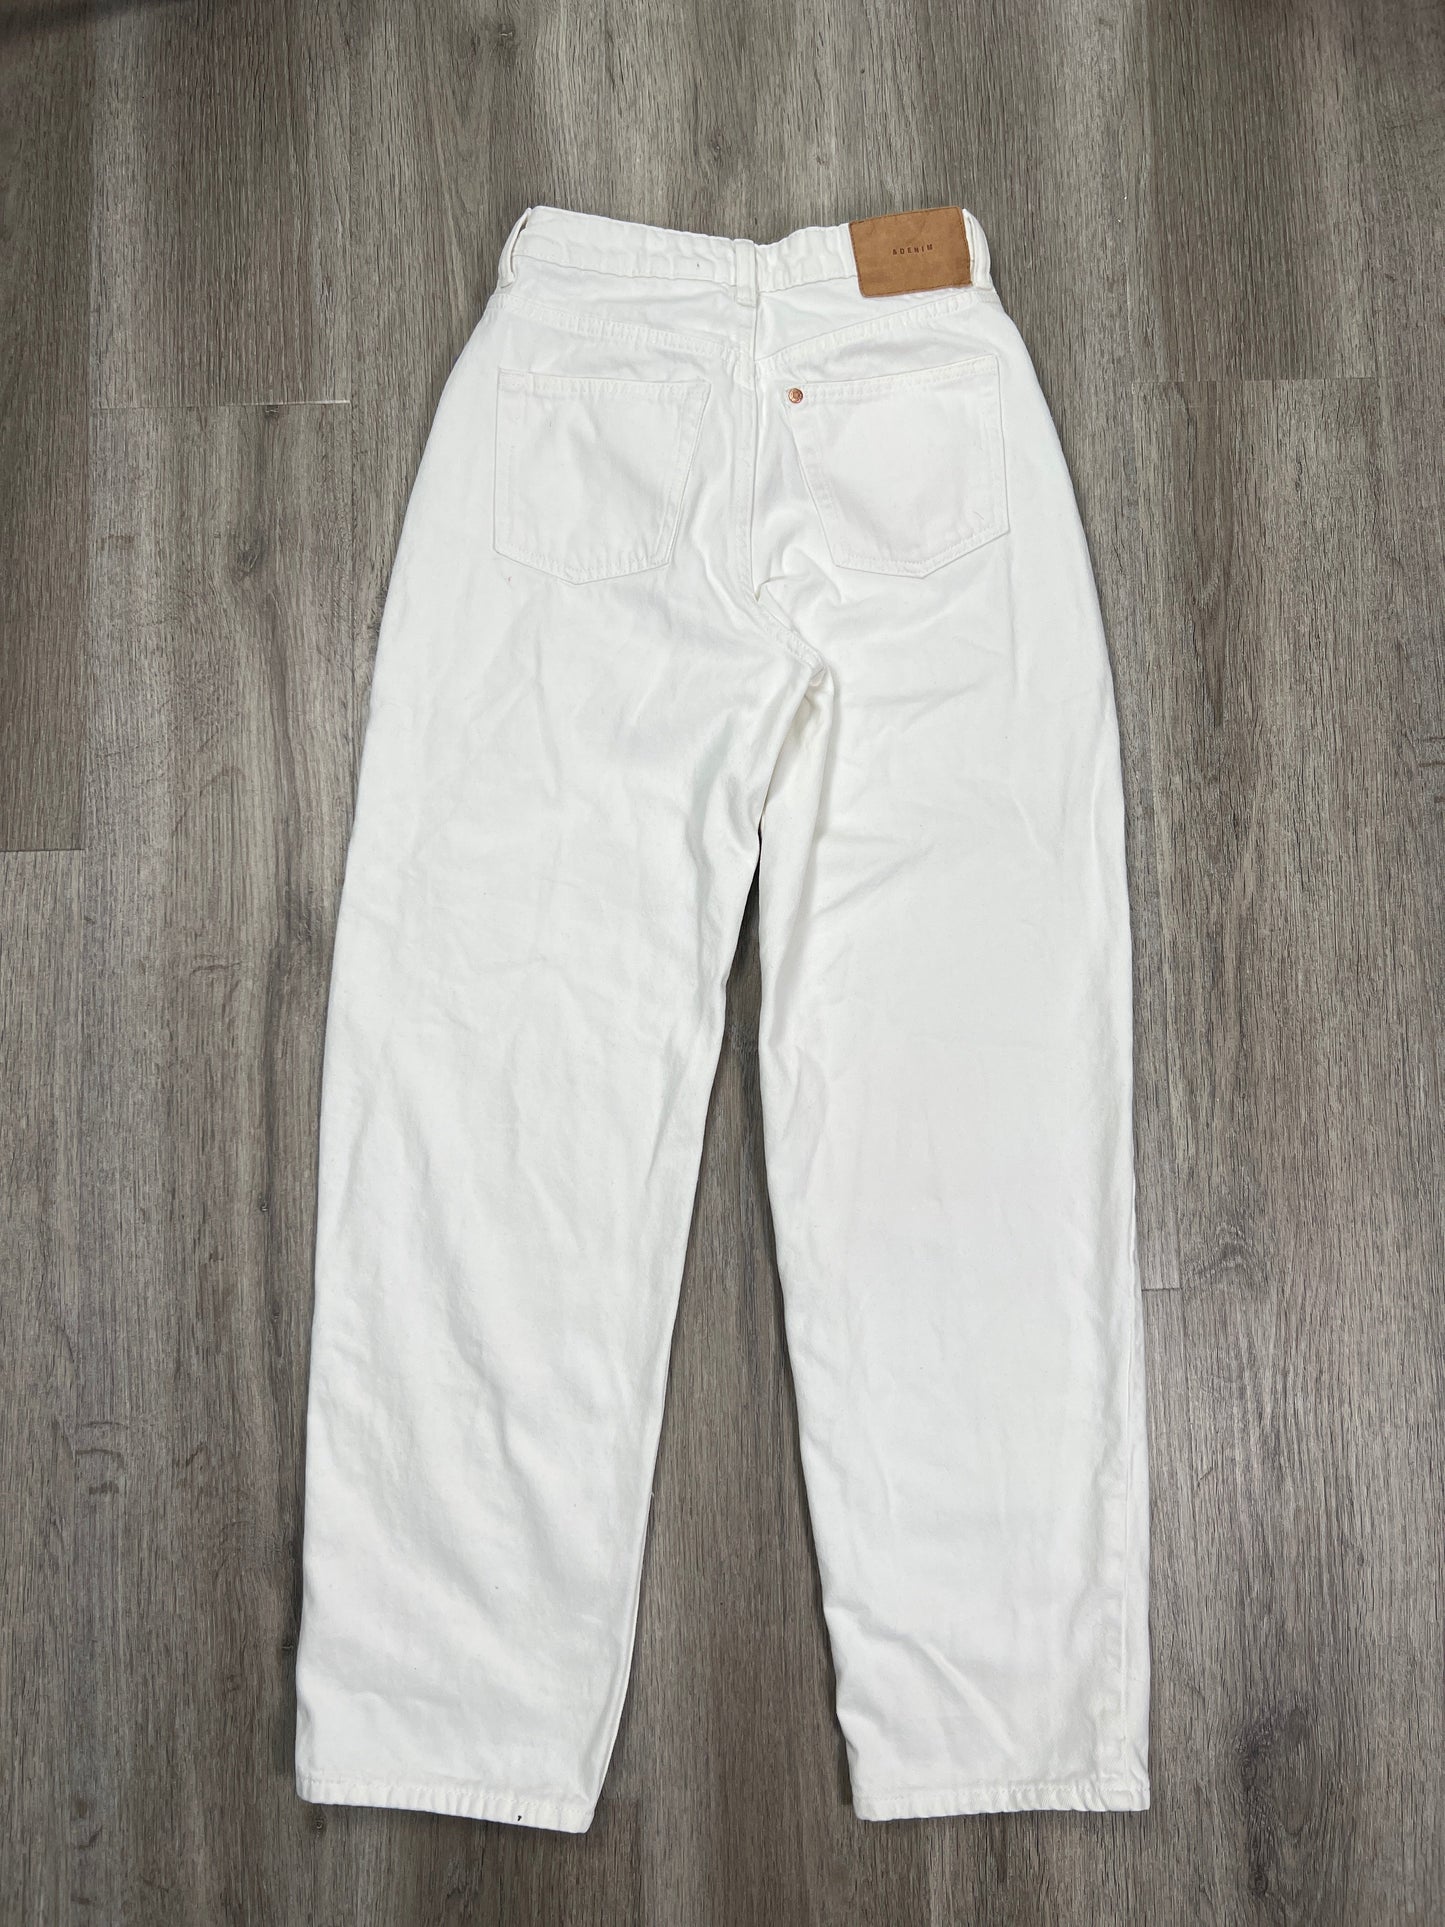 Jeans Wide Leg By H&m  Size: 2